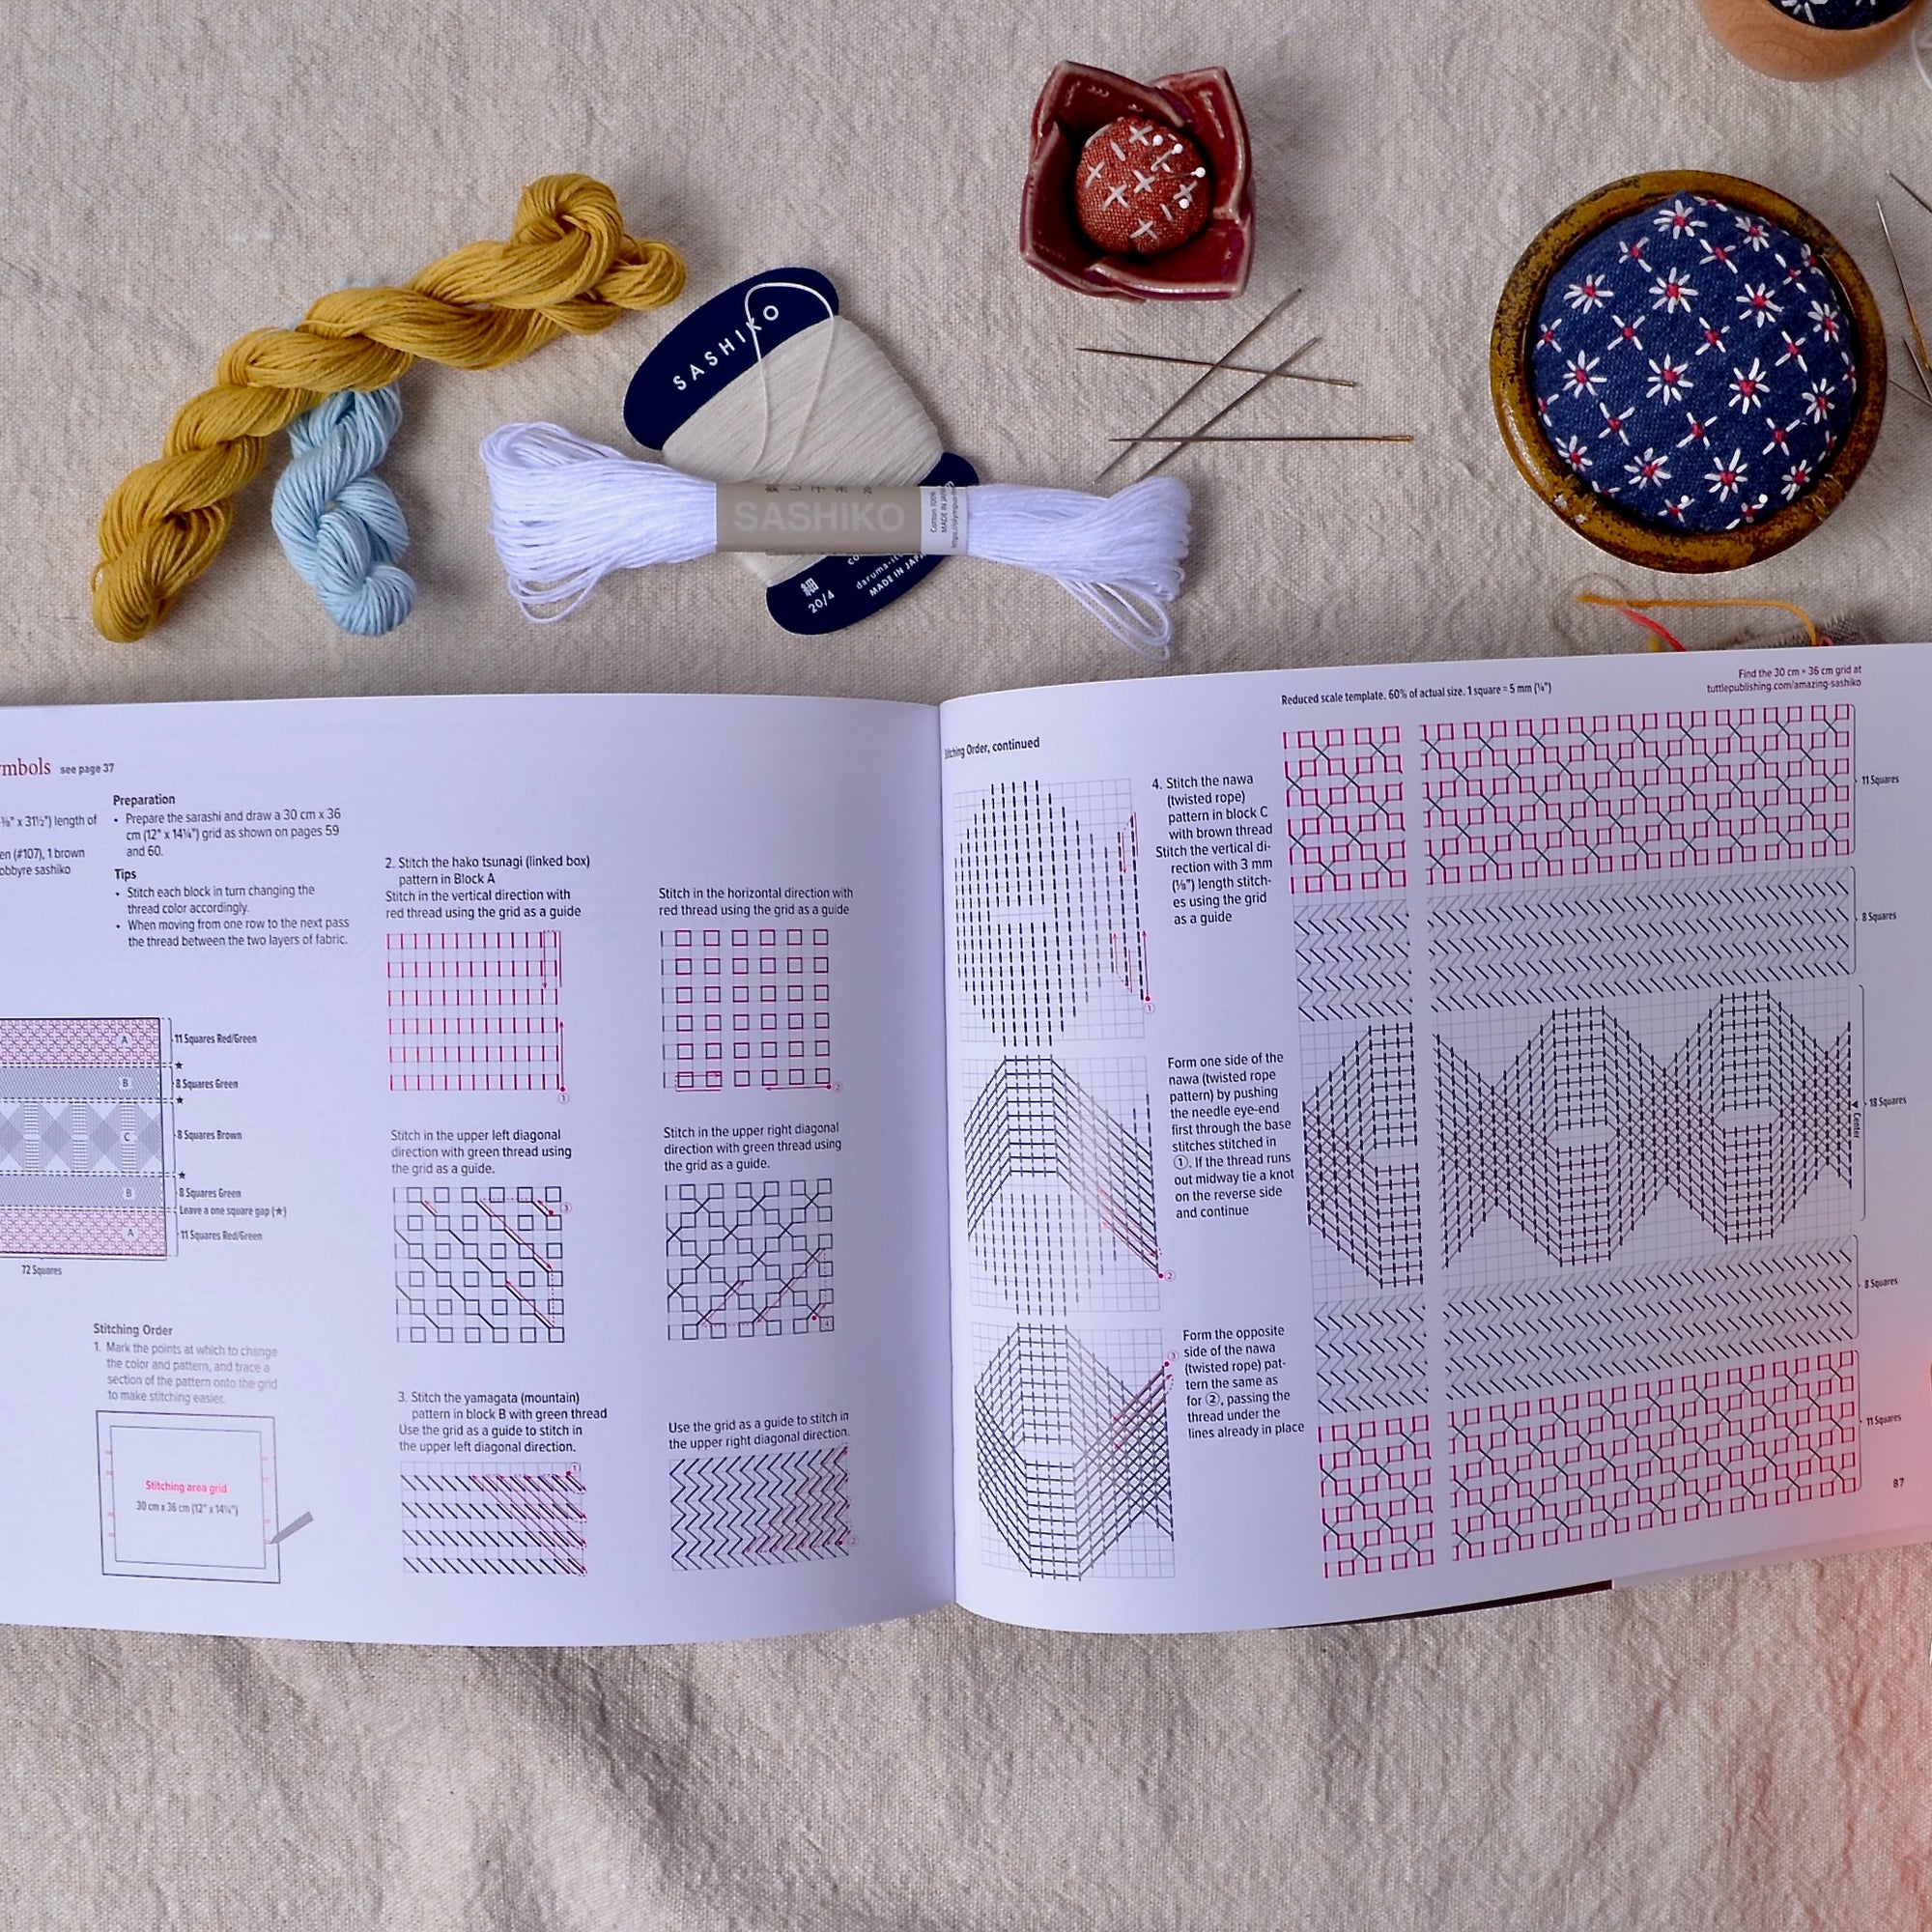 Embroidery Stitches: Over 400 Contemporary and Traditional Stitch Patterns [Book]